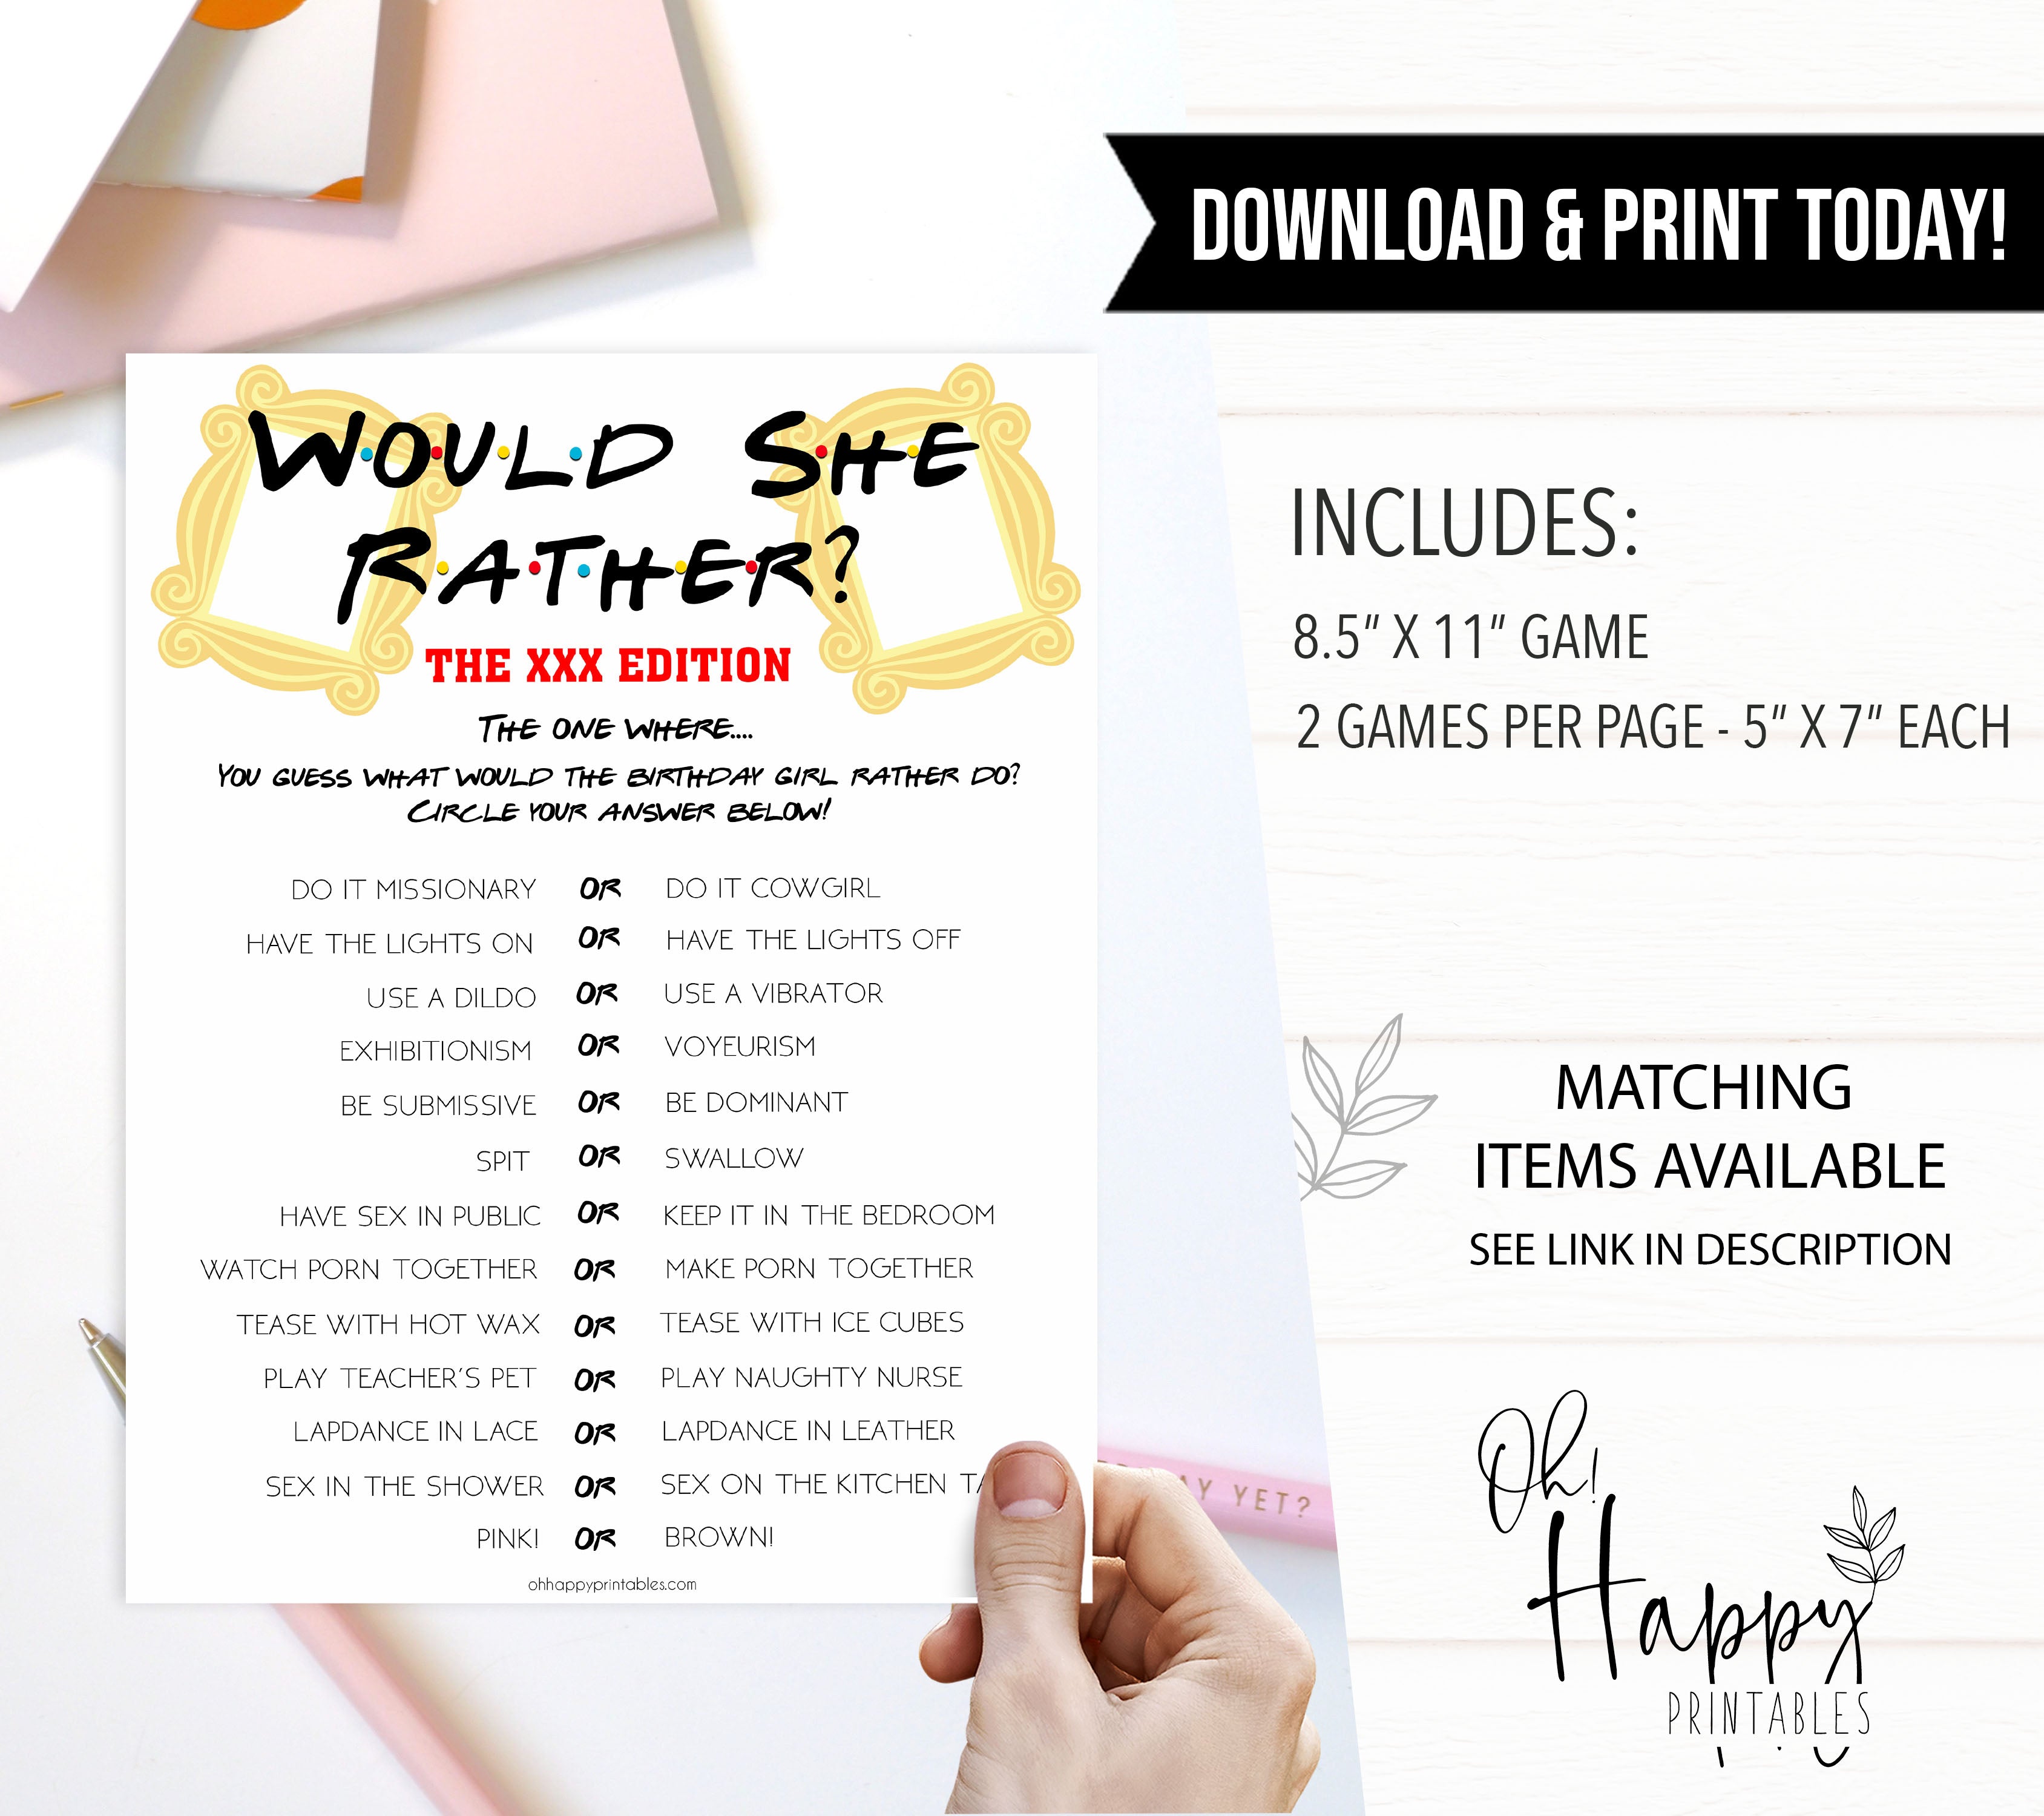 friends birthday games, friends would she rather, would she rather naught edition, would she rather birthday game, printable birthday games